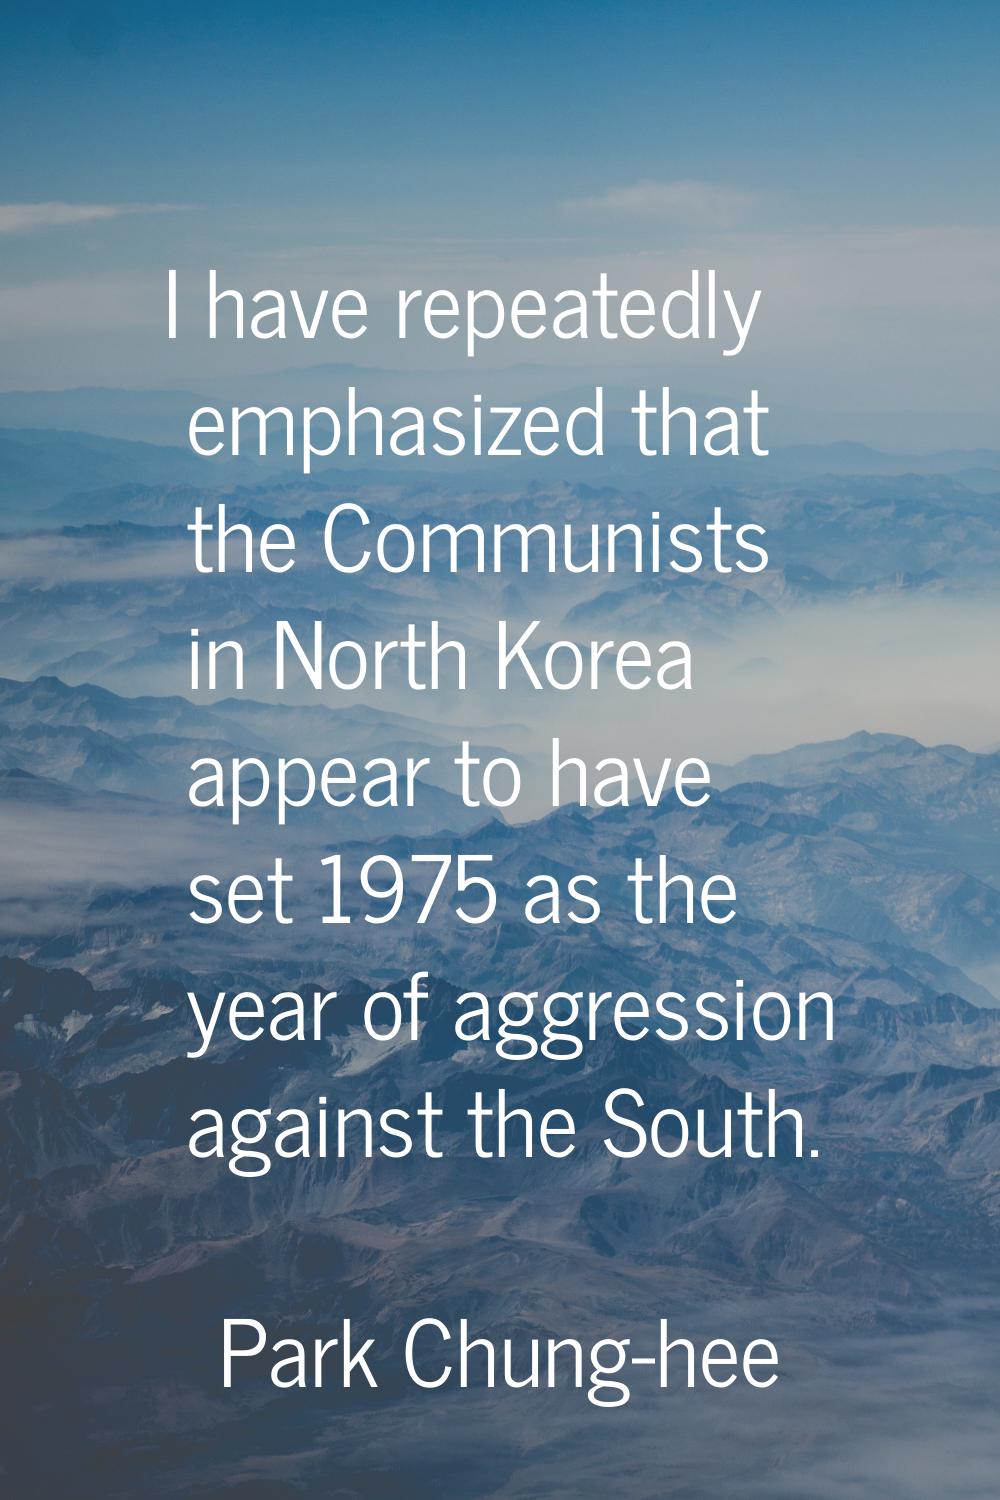 I have repeatedly emphasized that the Communists in North Korea appear to have set 1975 as the year